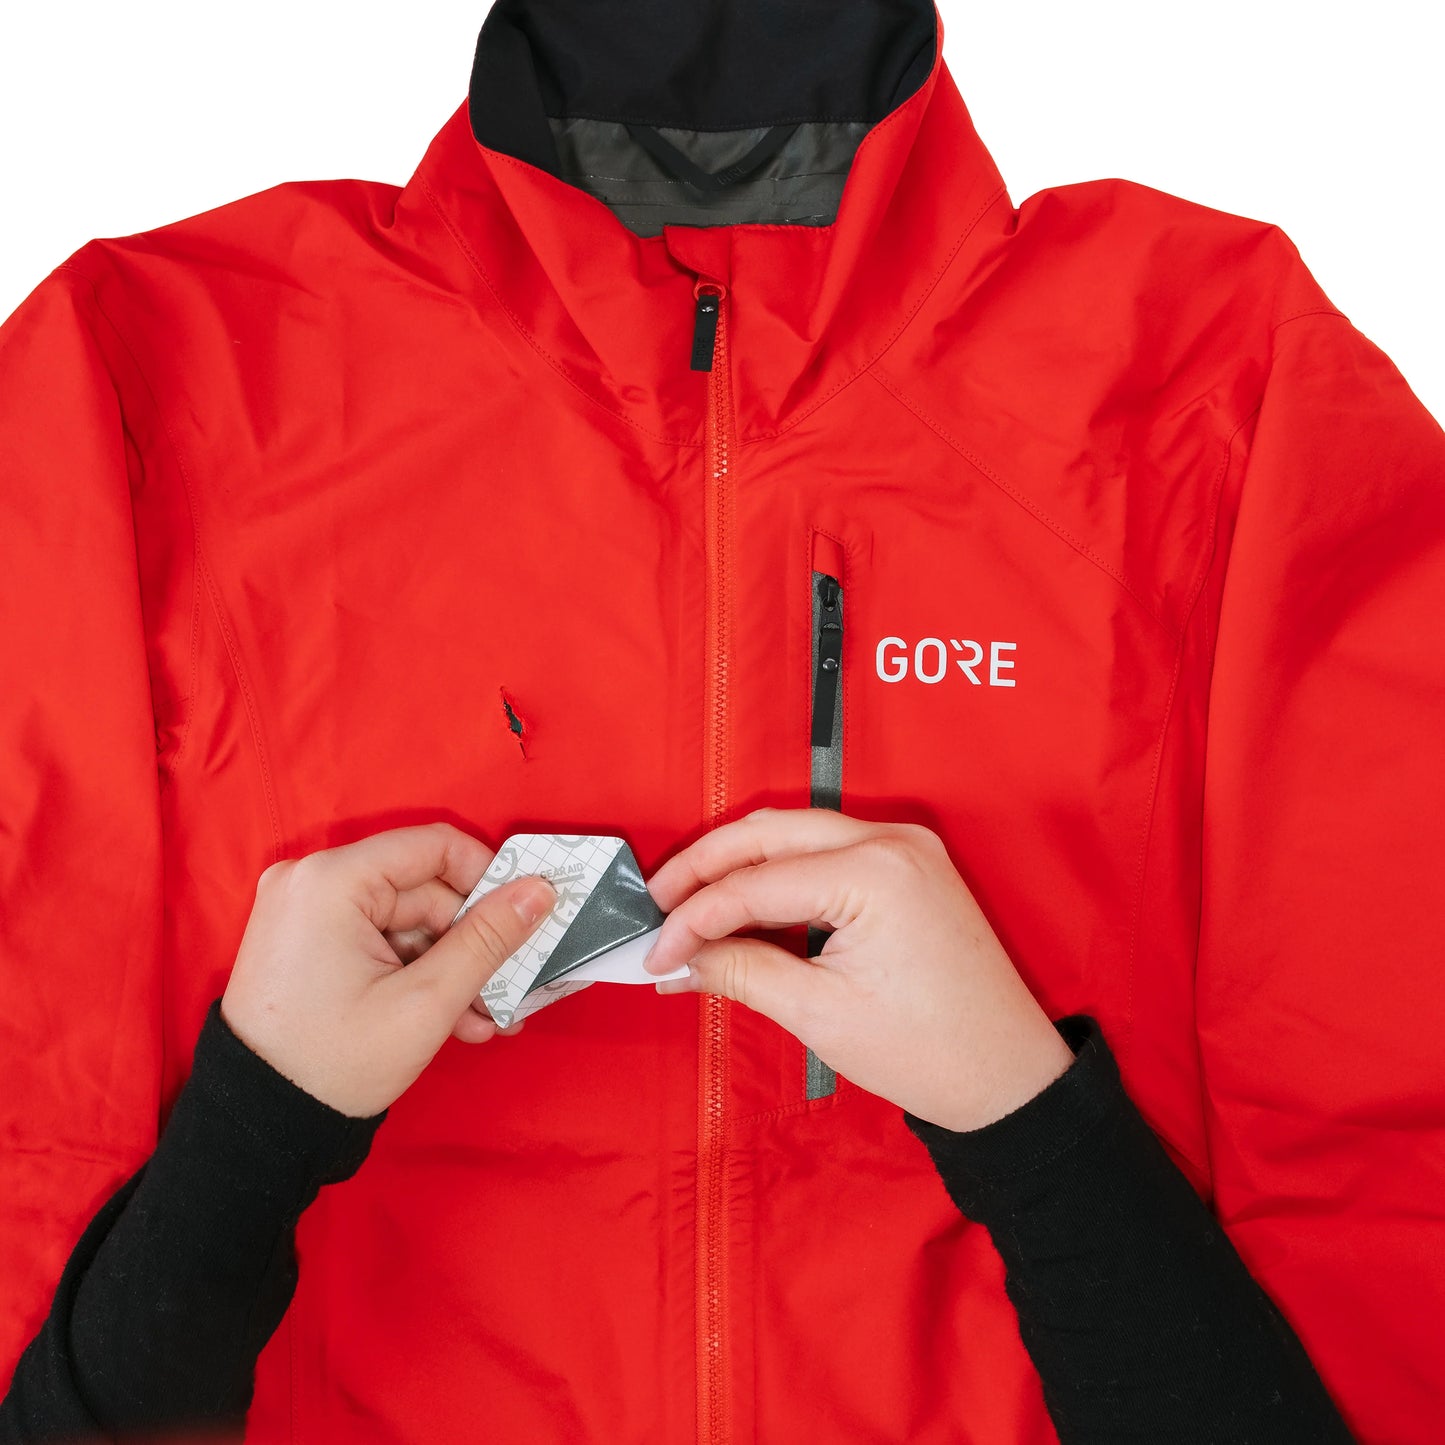 Gear Aid Gore-Tex Fabric Patches